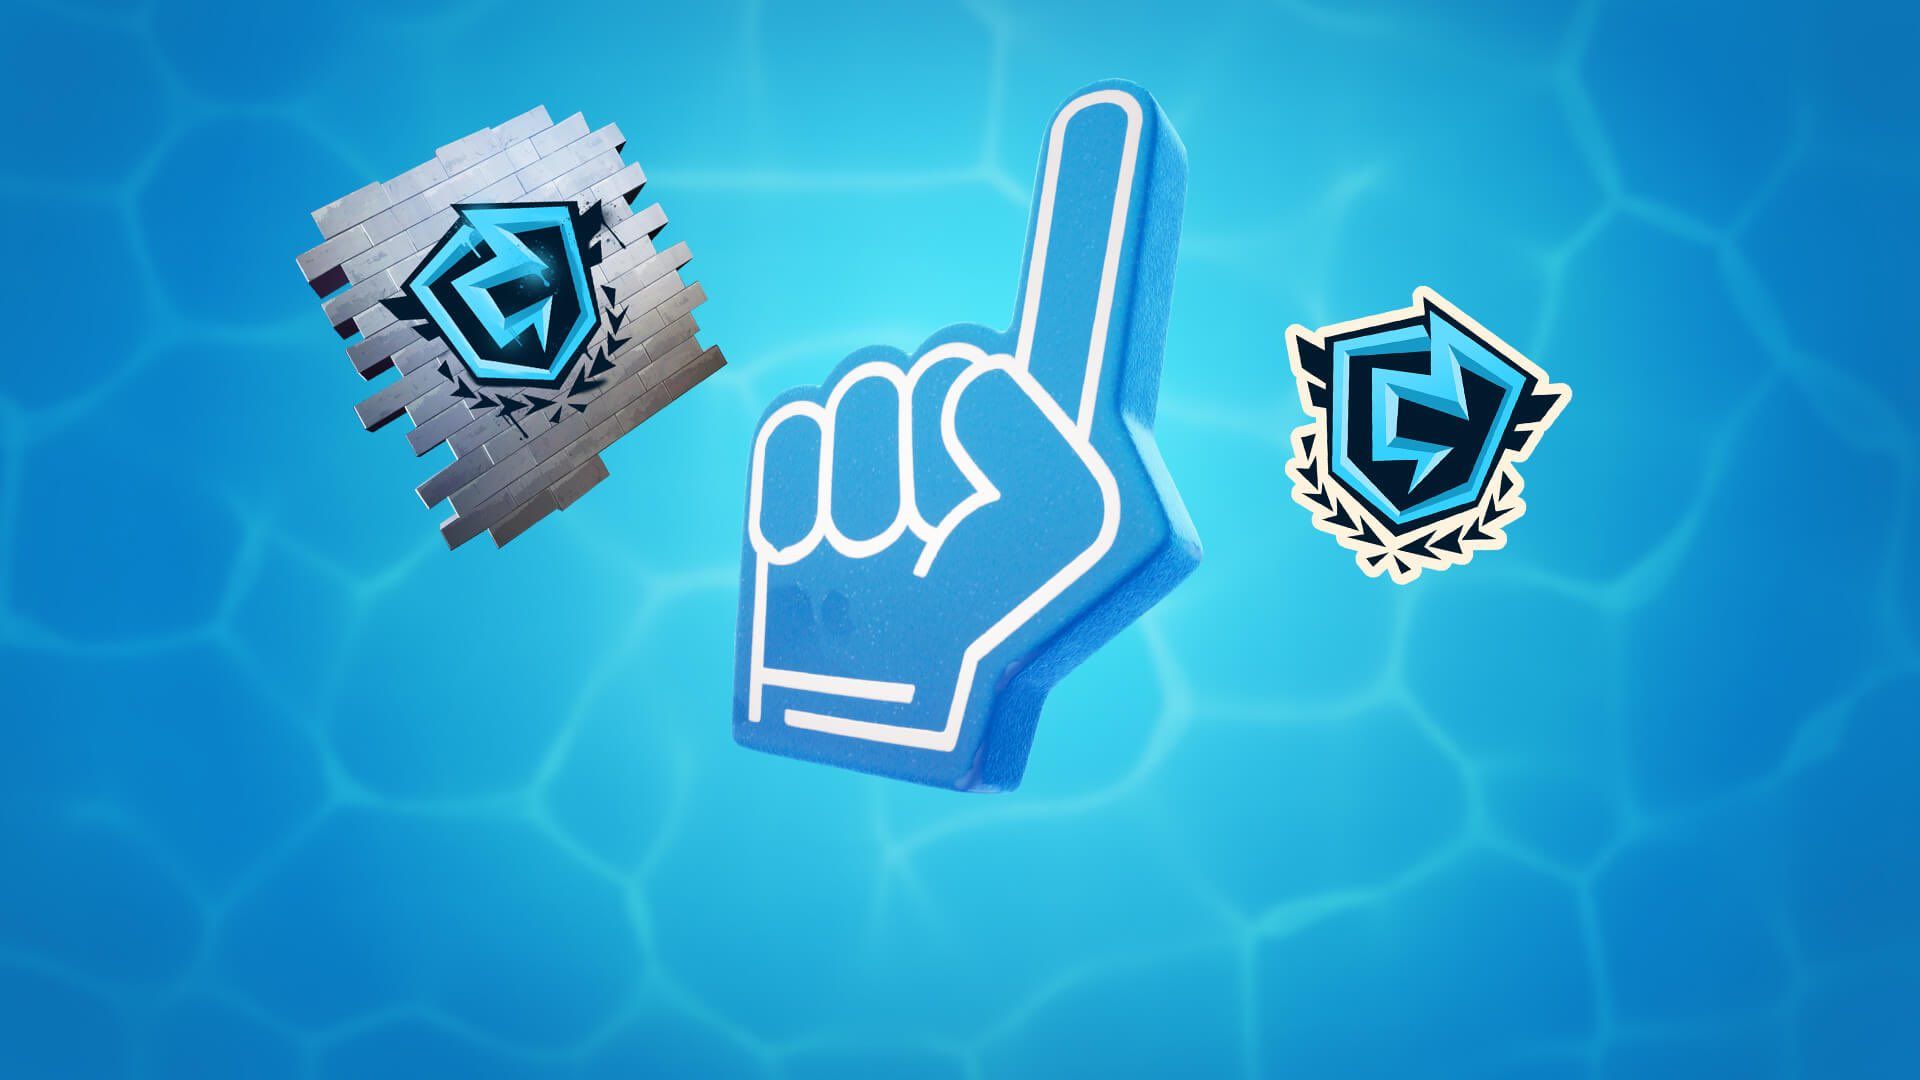 Fortnite News. LootLake.net #Fortnite Champion Series ( FNCS) Broadcasts Return August 1st, 2020! Viewers On Twitch Will Be Able To Earn FNCS Themed Fortnite Items, Including A Spray, Emoji And